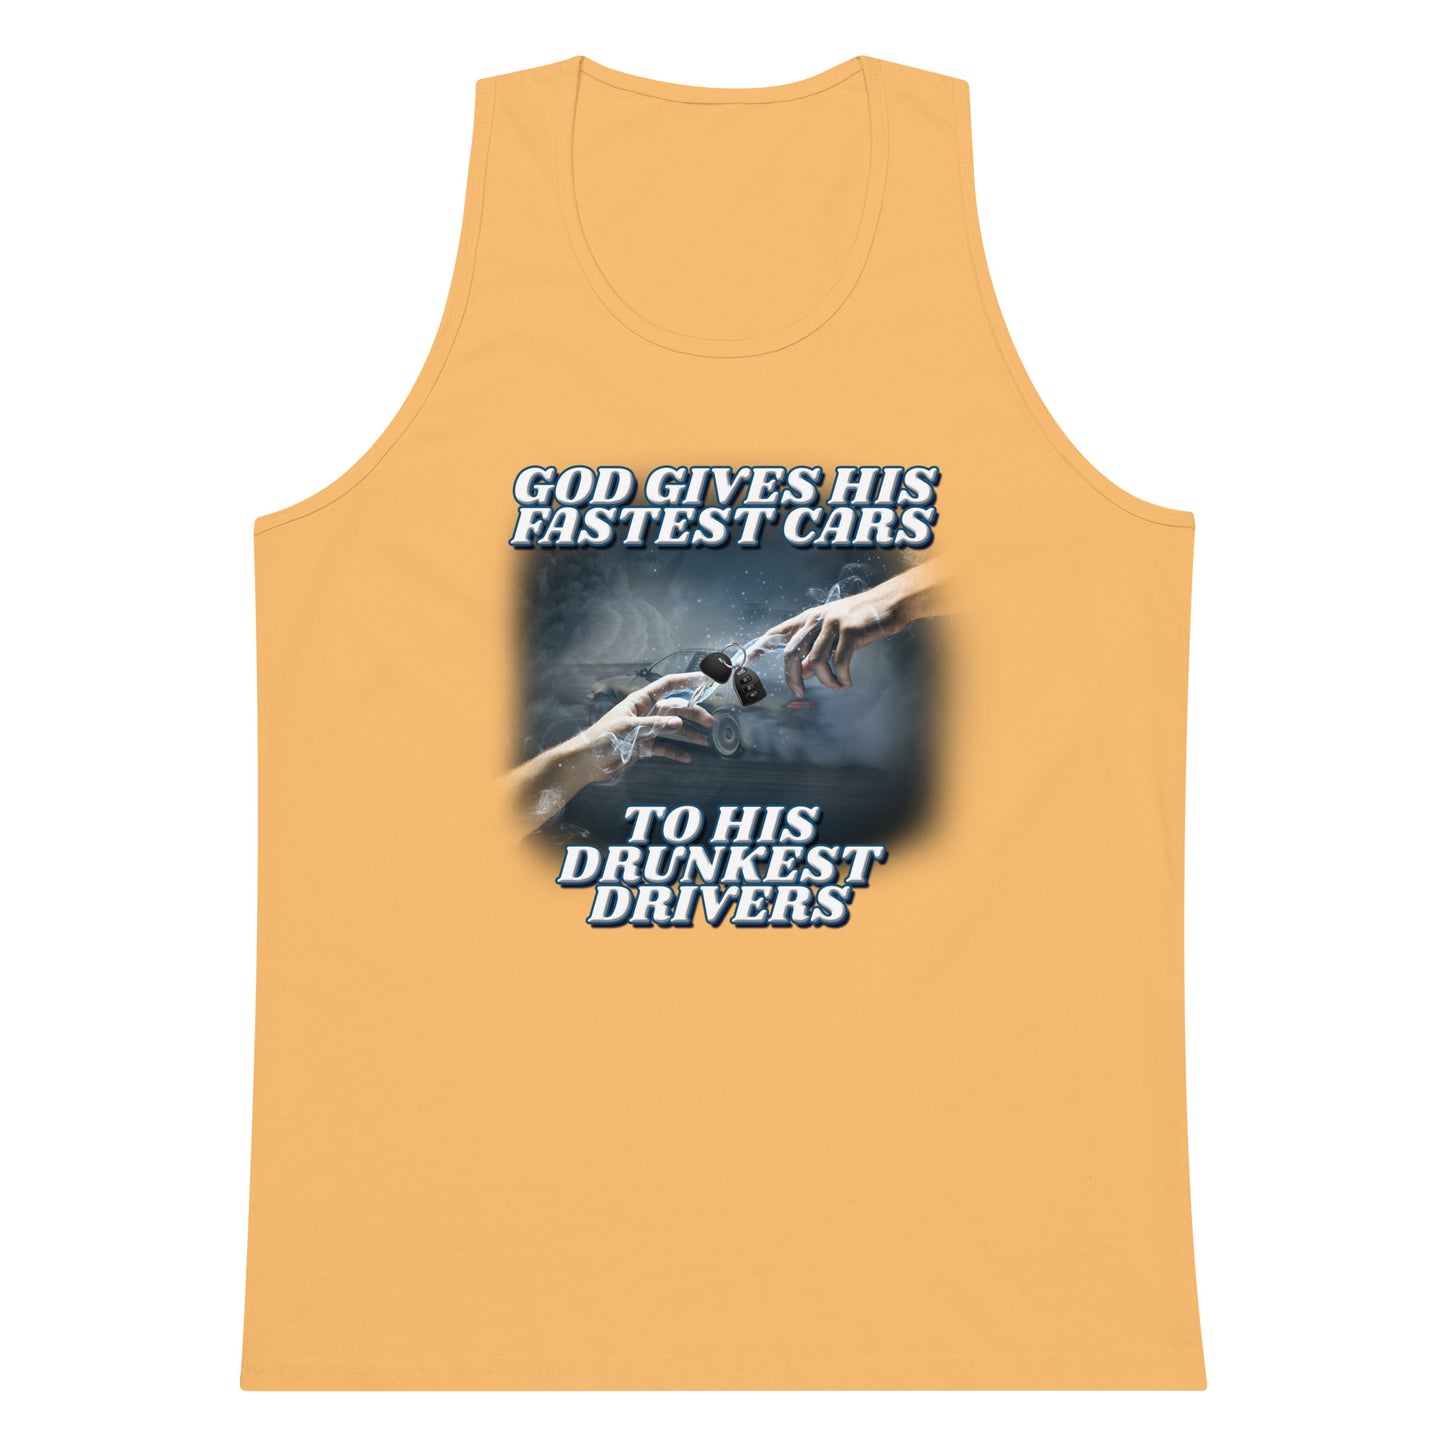 God Gives His Fastest Cars to His Drunkest Drivers tank top